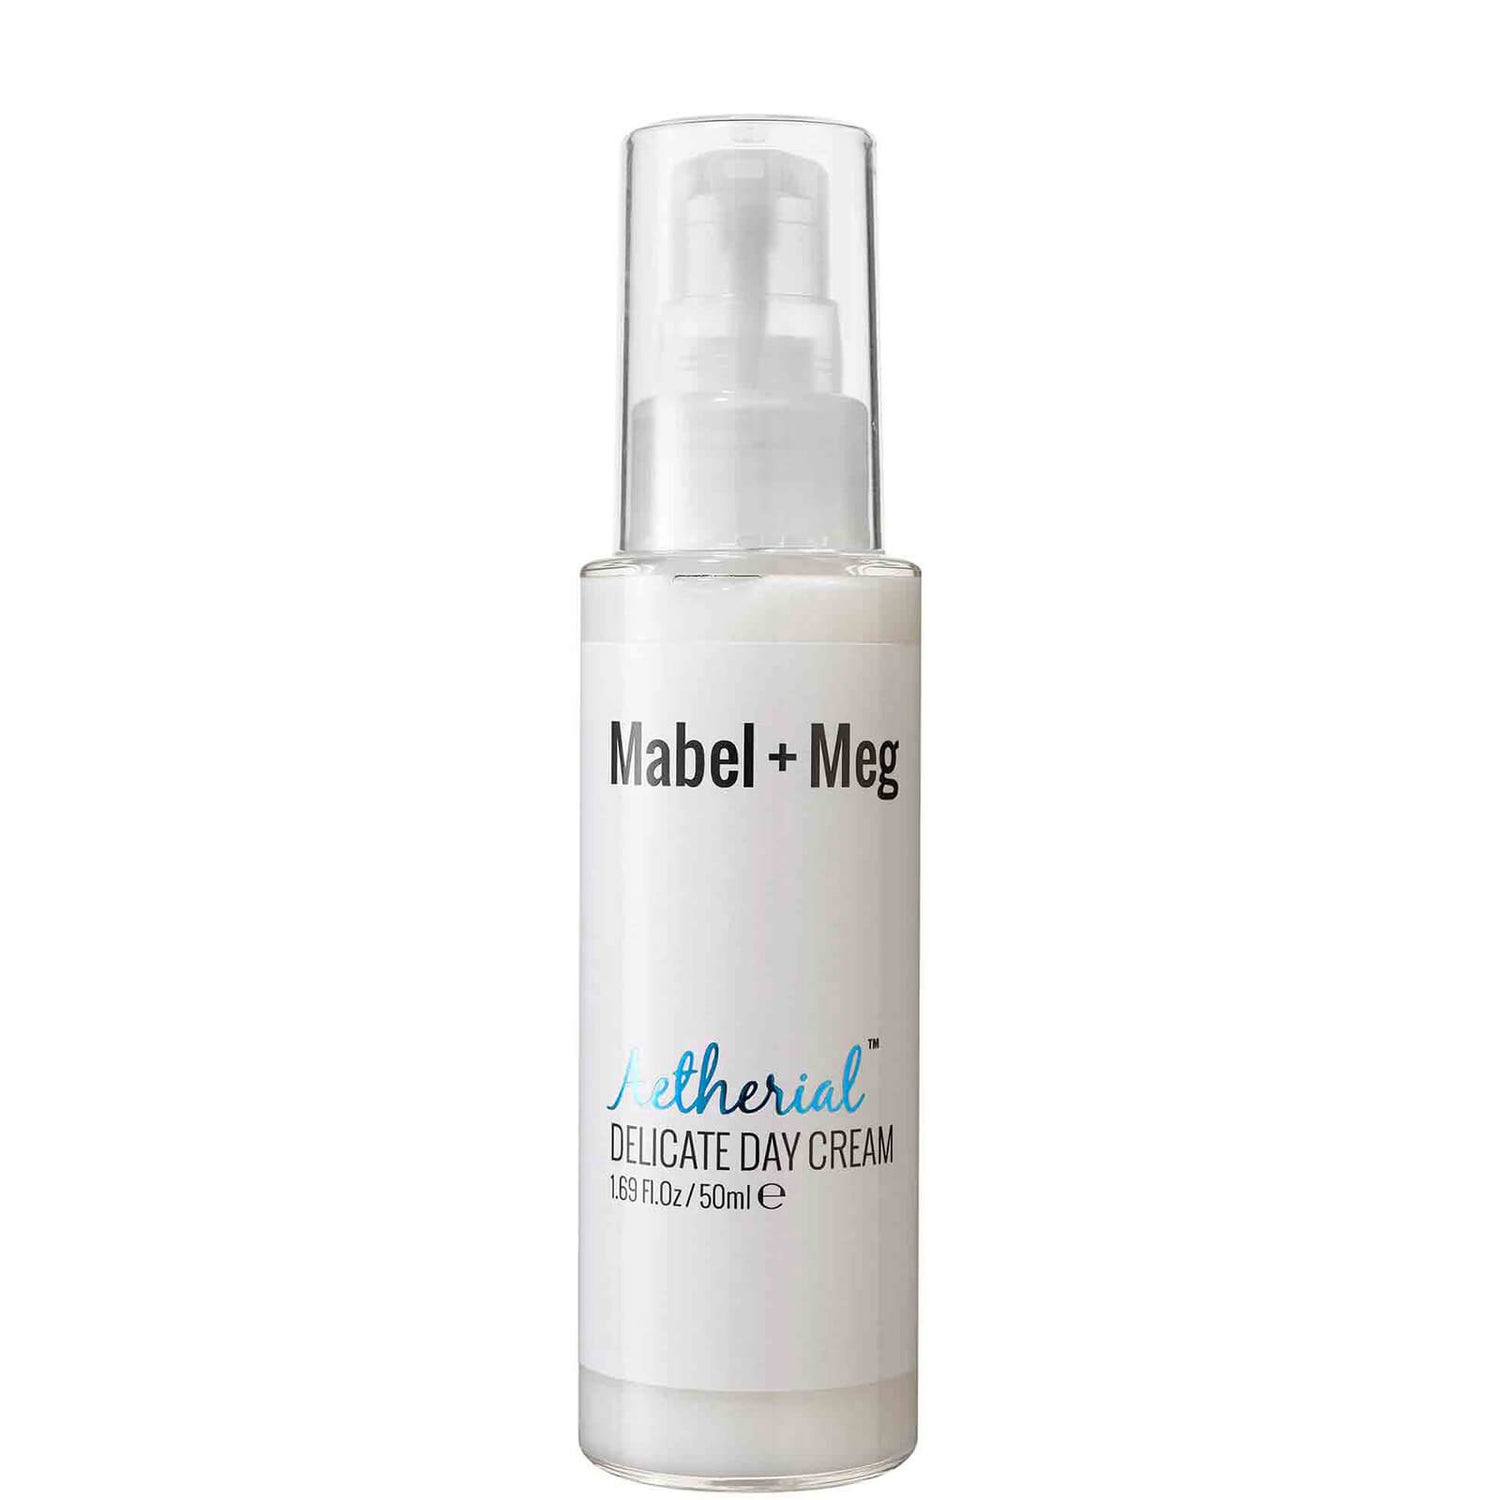 Mabel + Meg Aetherial Delicate Day Cream